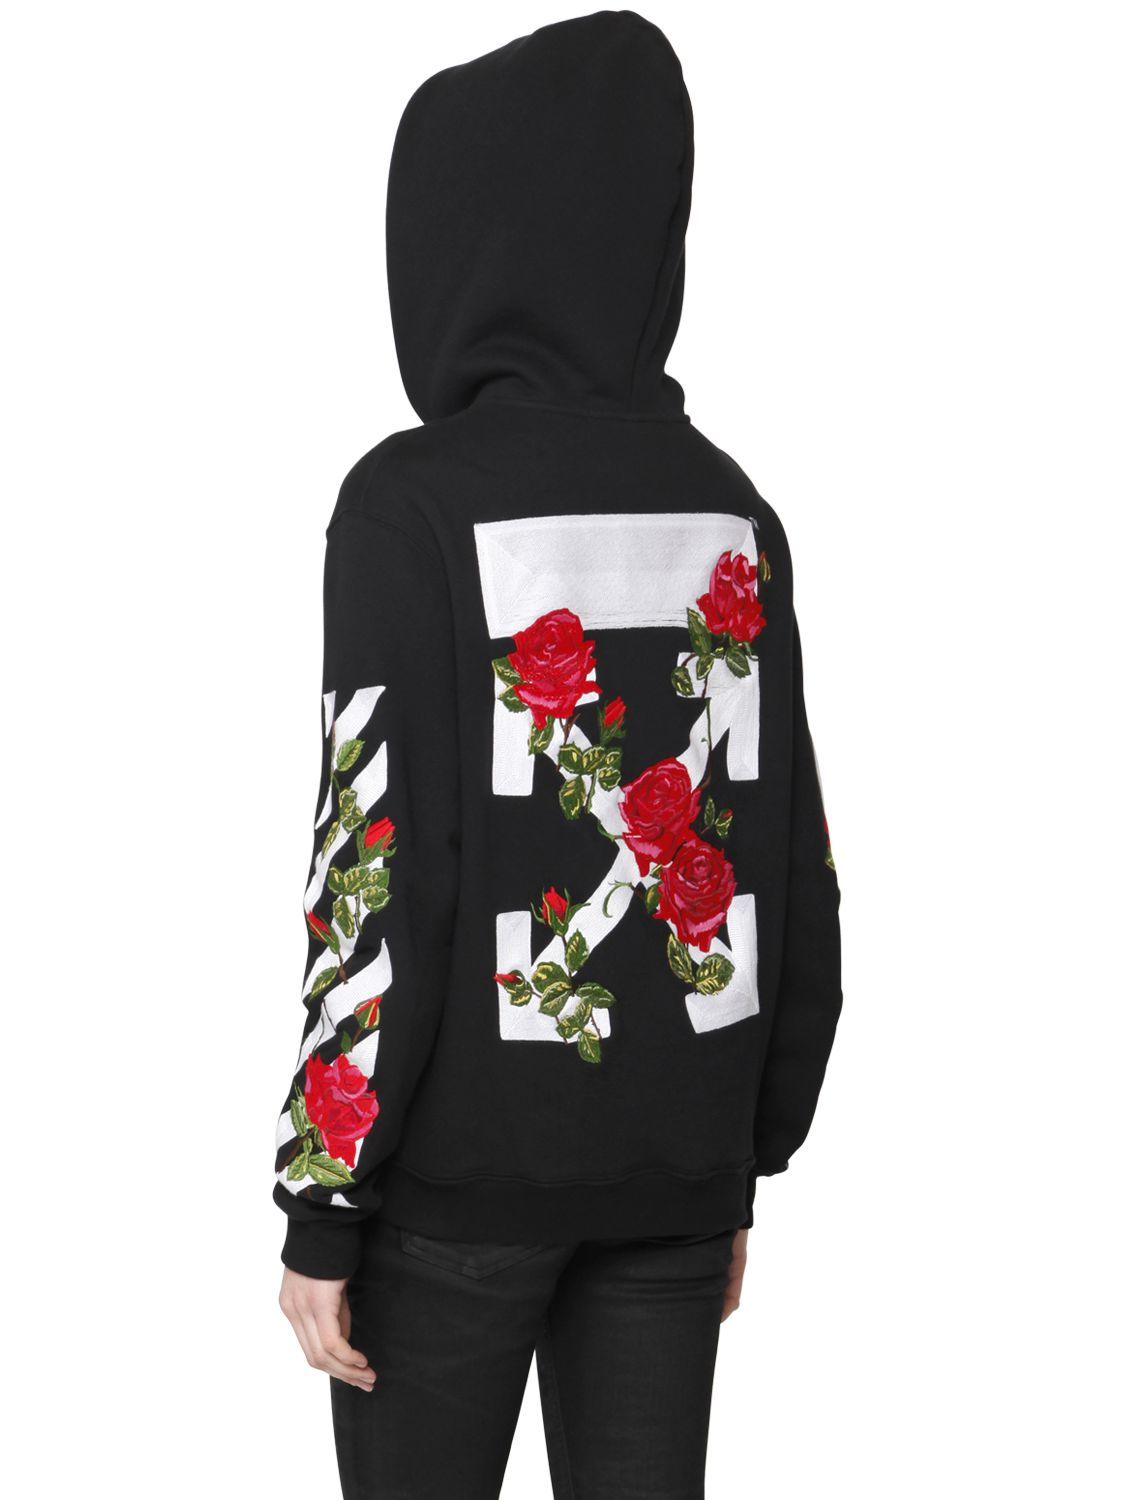 Off-White c/o Virgil Abloh Rose Embroidery Zip-up Cotton Sweatshirt in  Black/Red/White (Black) | Lyst